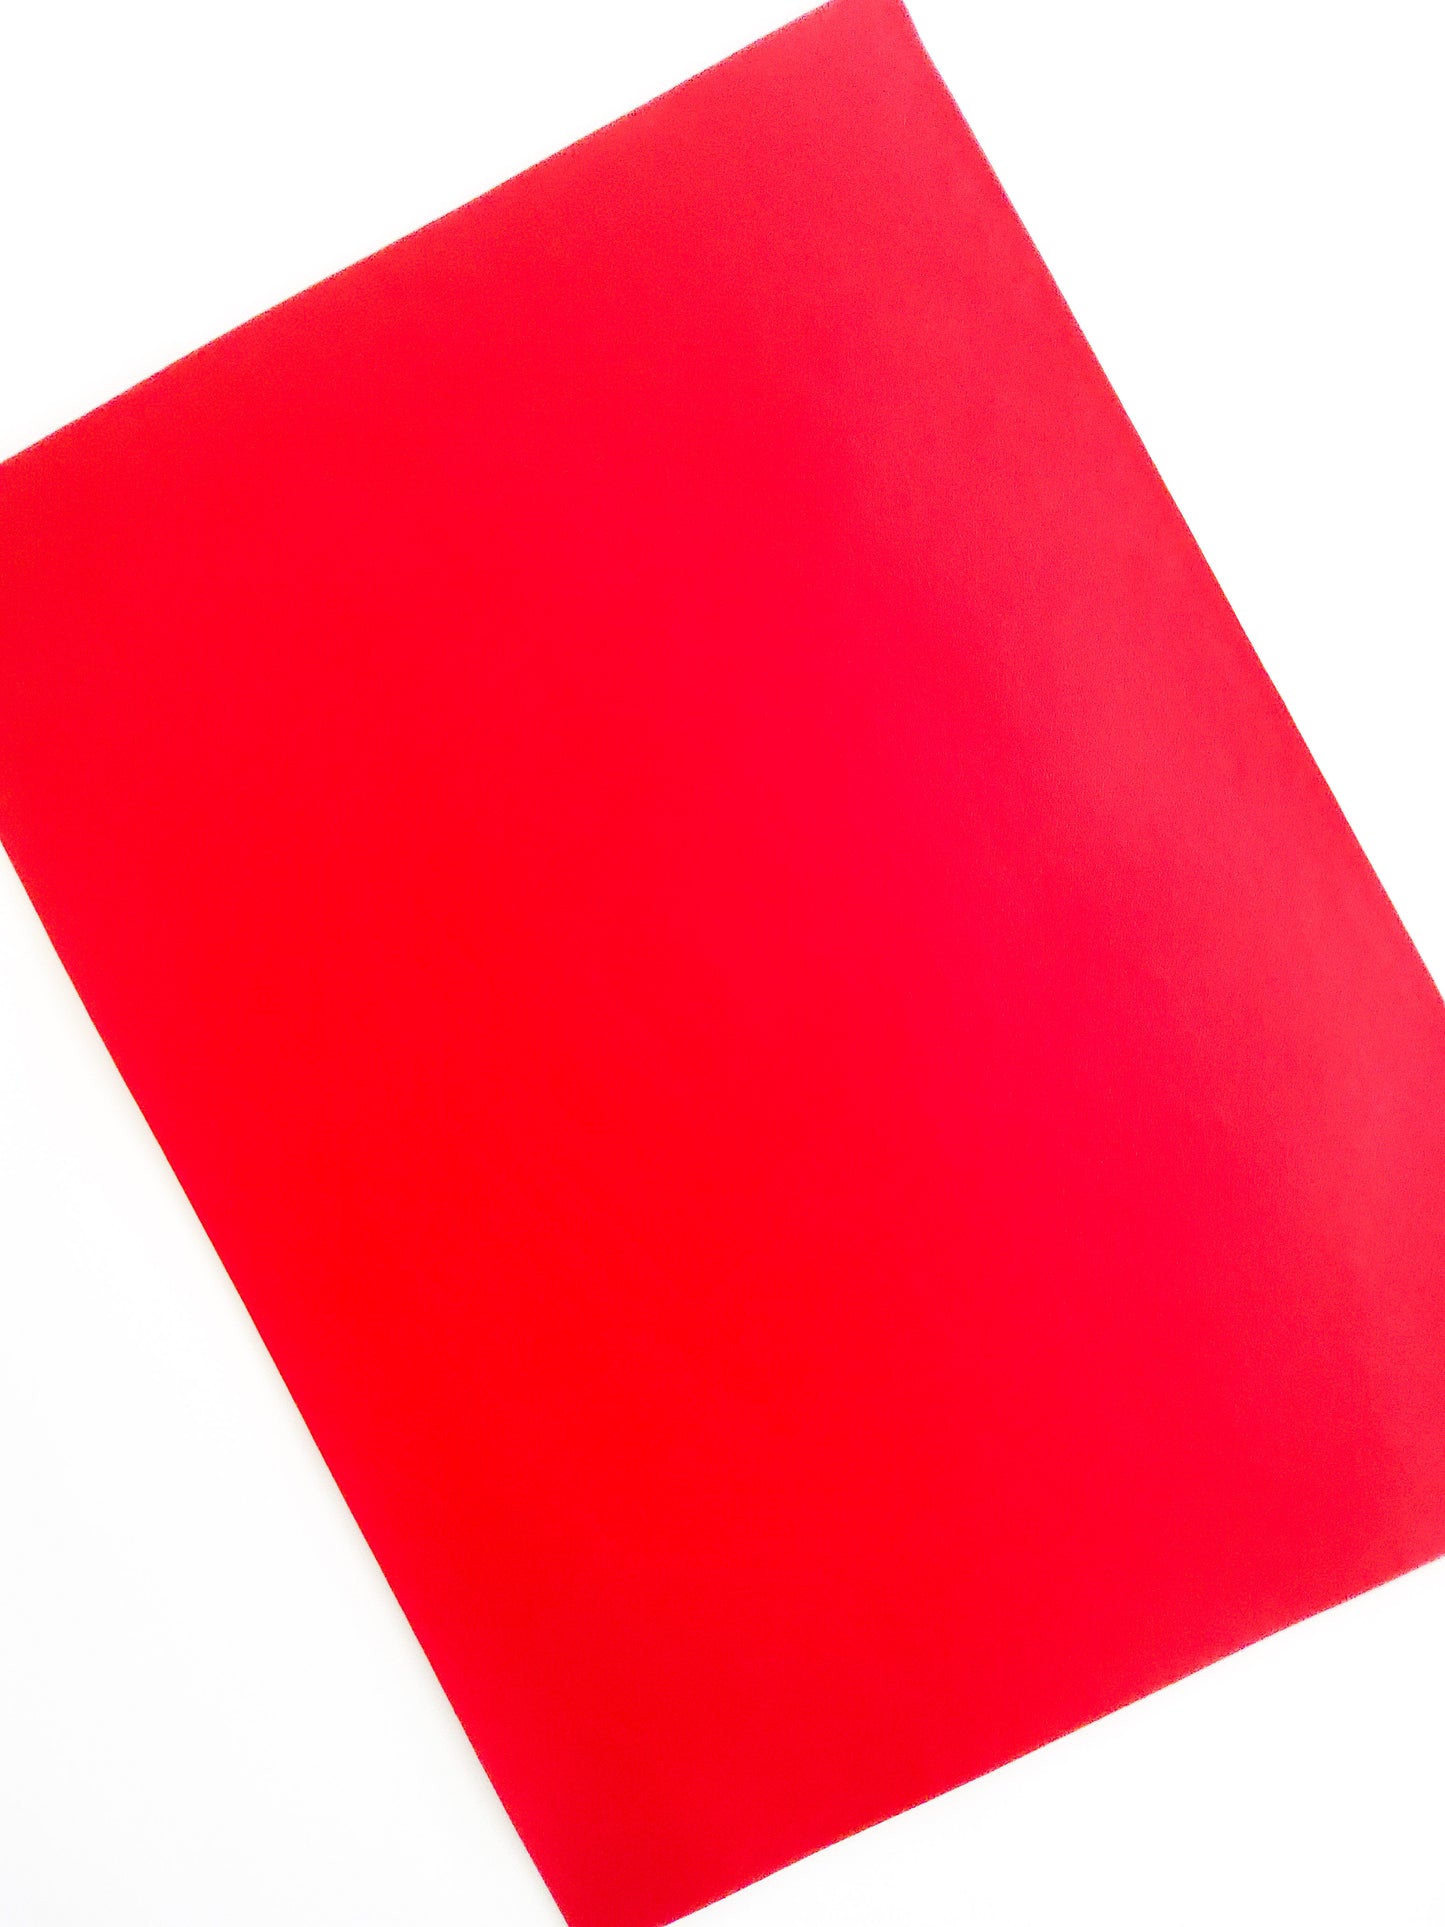 Red Smooth 9x12 faux leather sheet